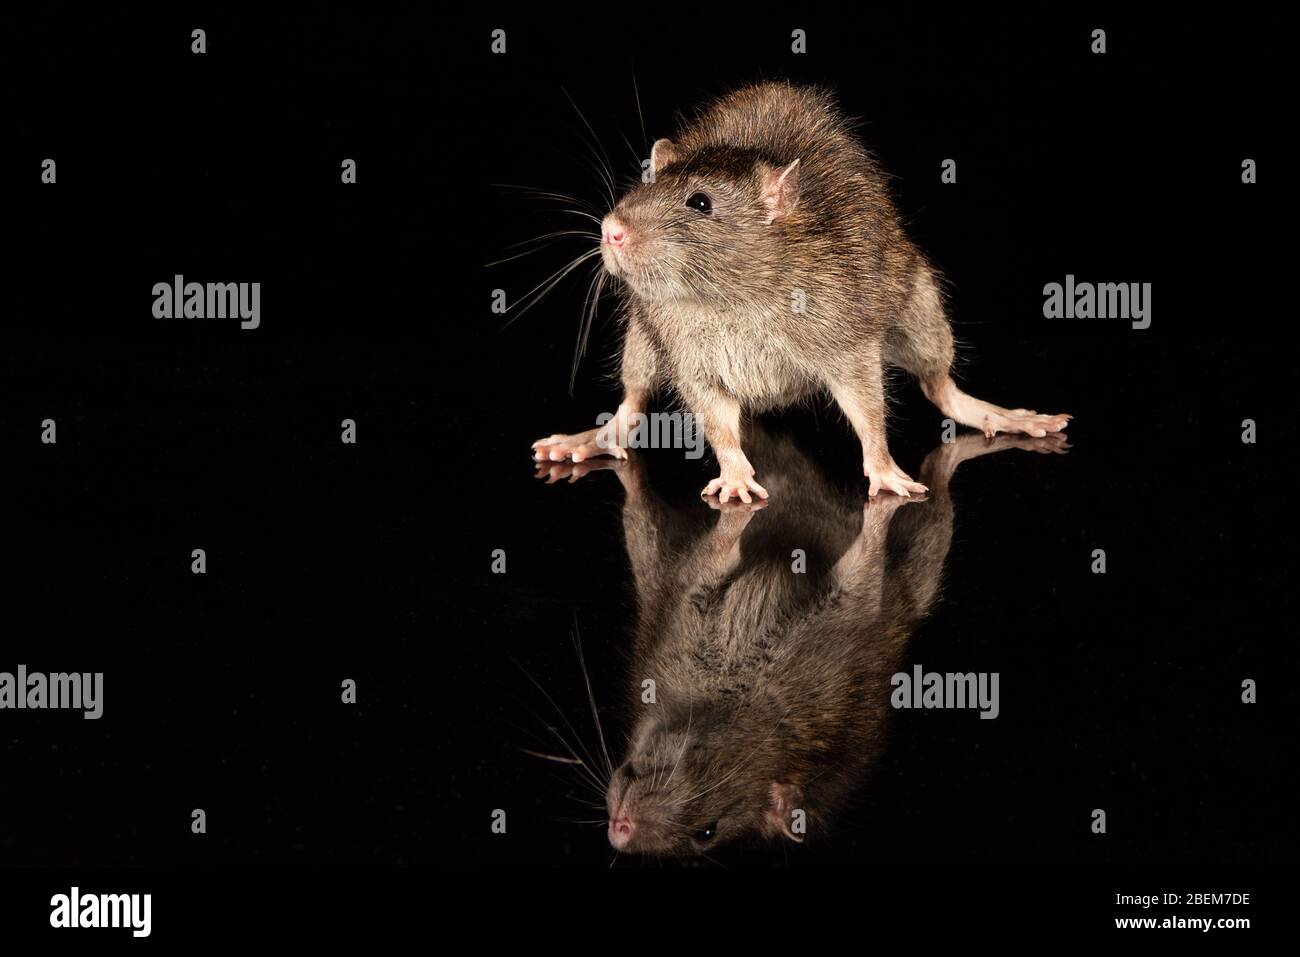 A common rat on a reflective surface. The surround is black with copy space Stock Photo